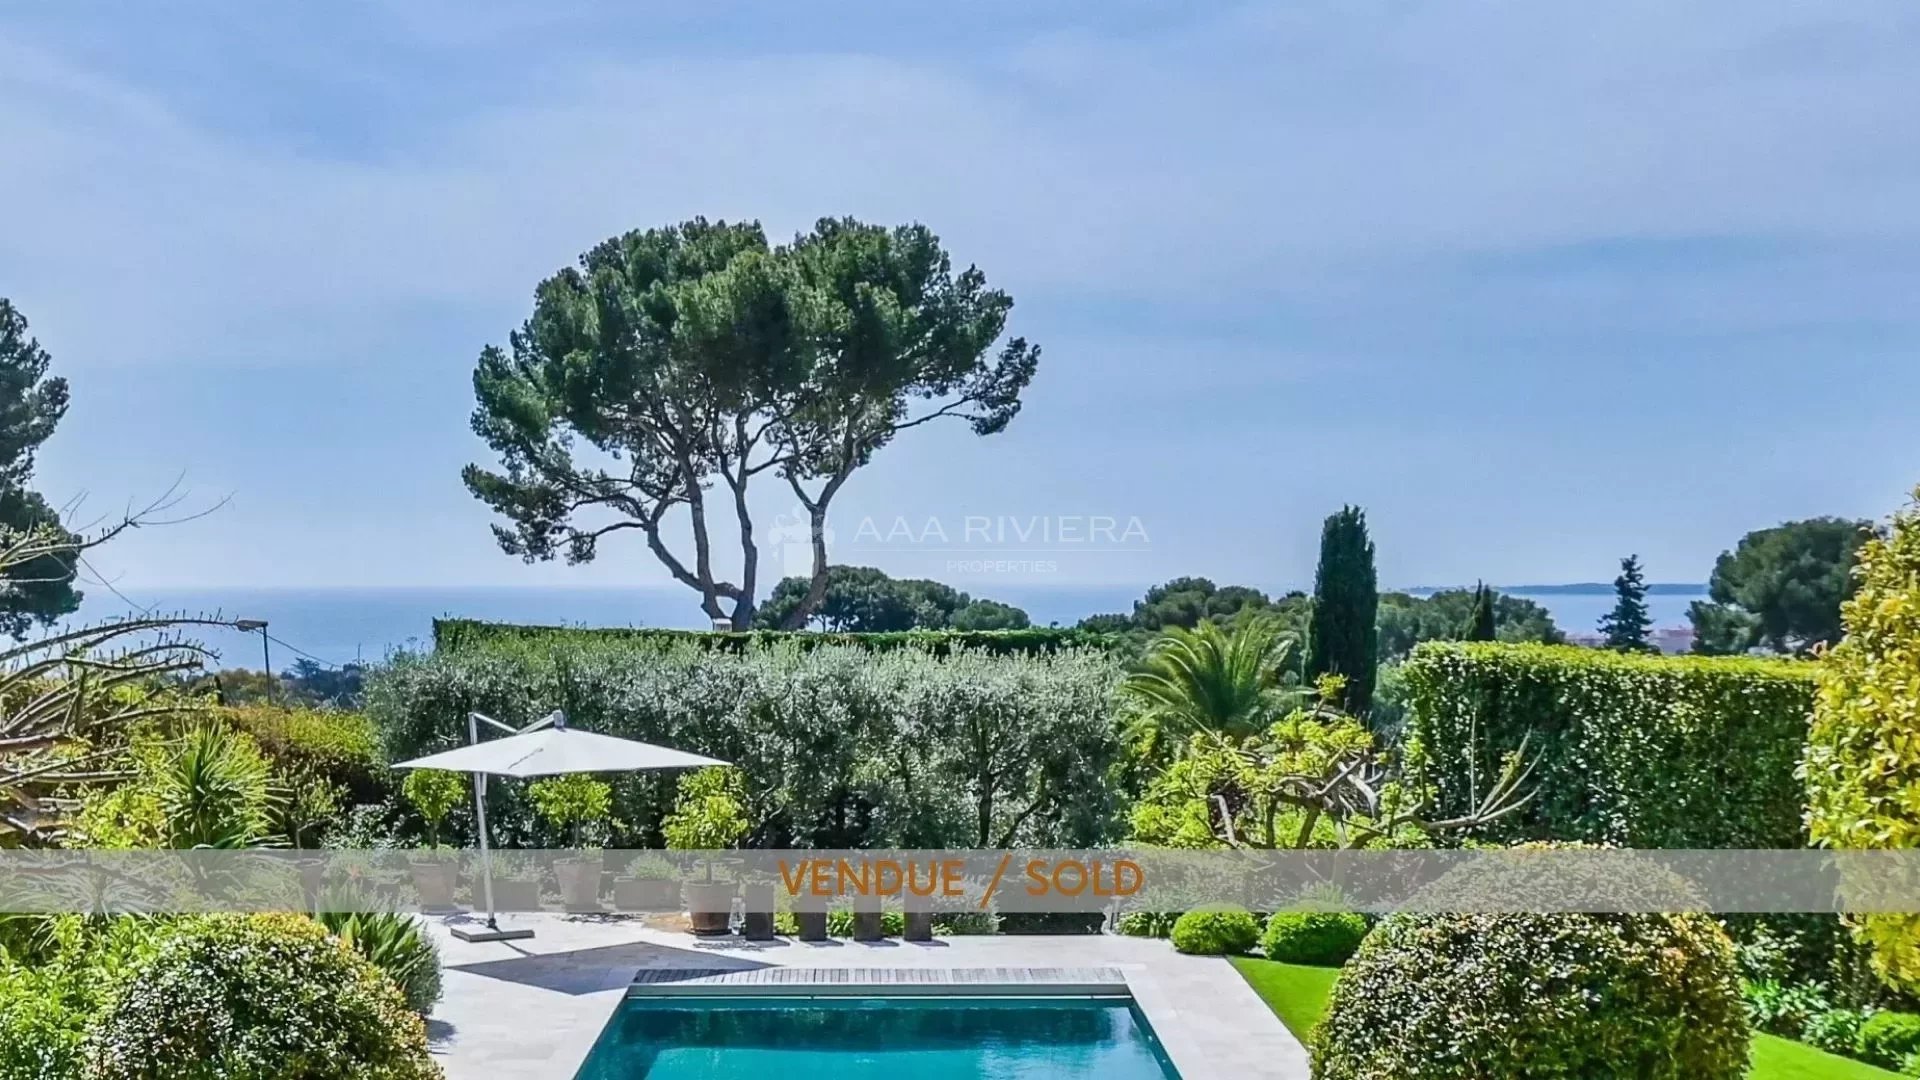 SOLE AGENT - SOLD - Superb property with sea view on the heights of Domaine de Pimeau in Antibes